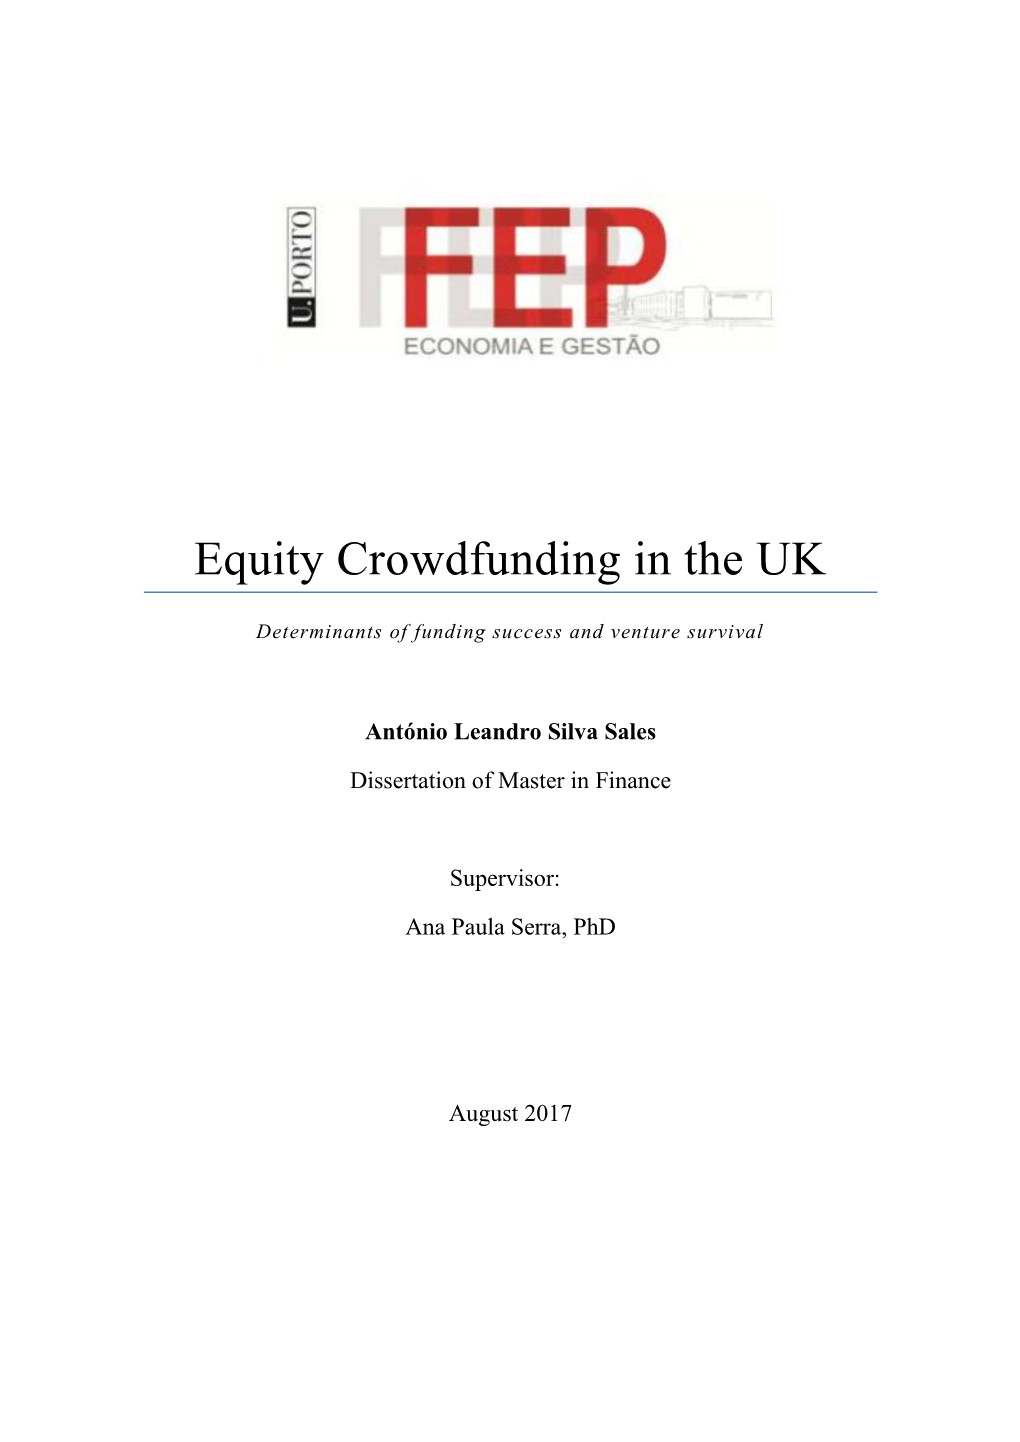 Equity Crowdfunding in the UK